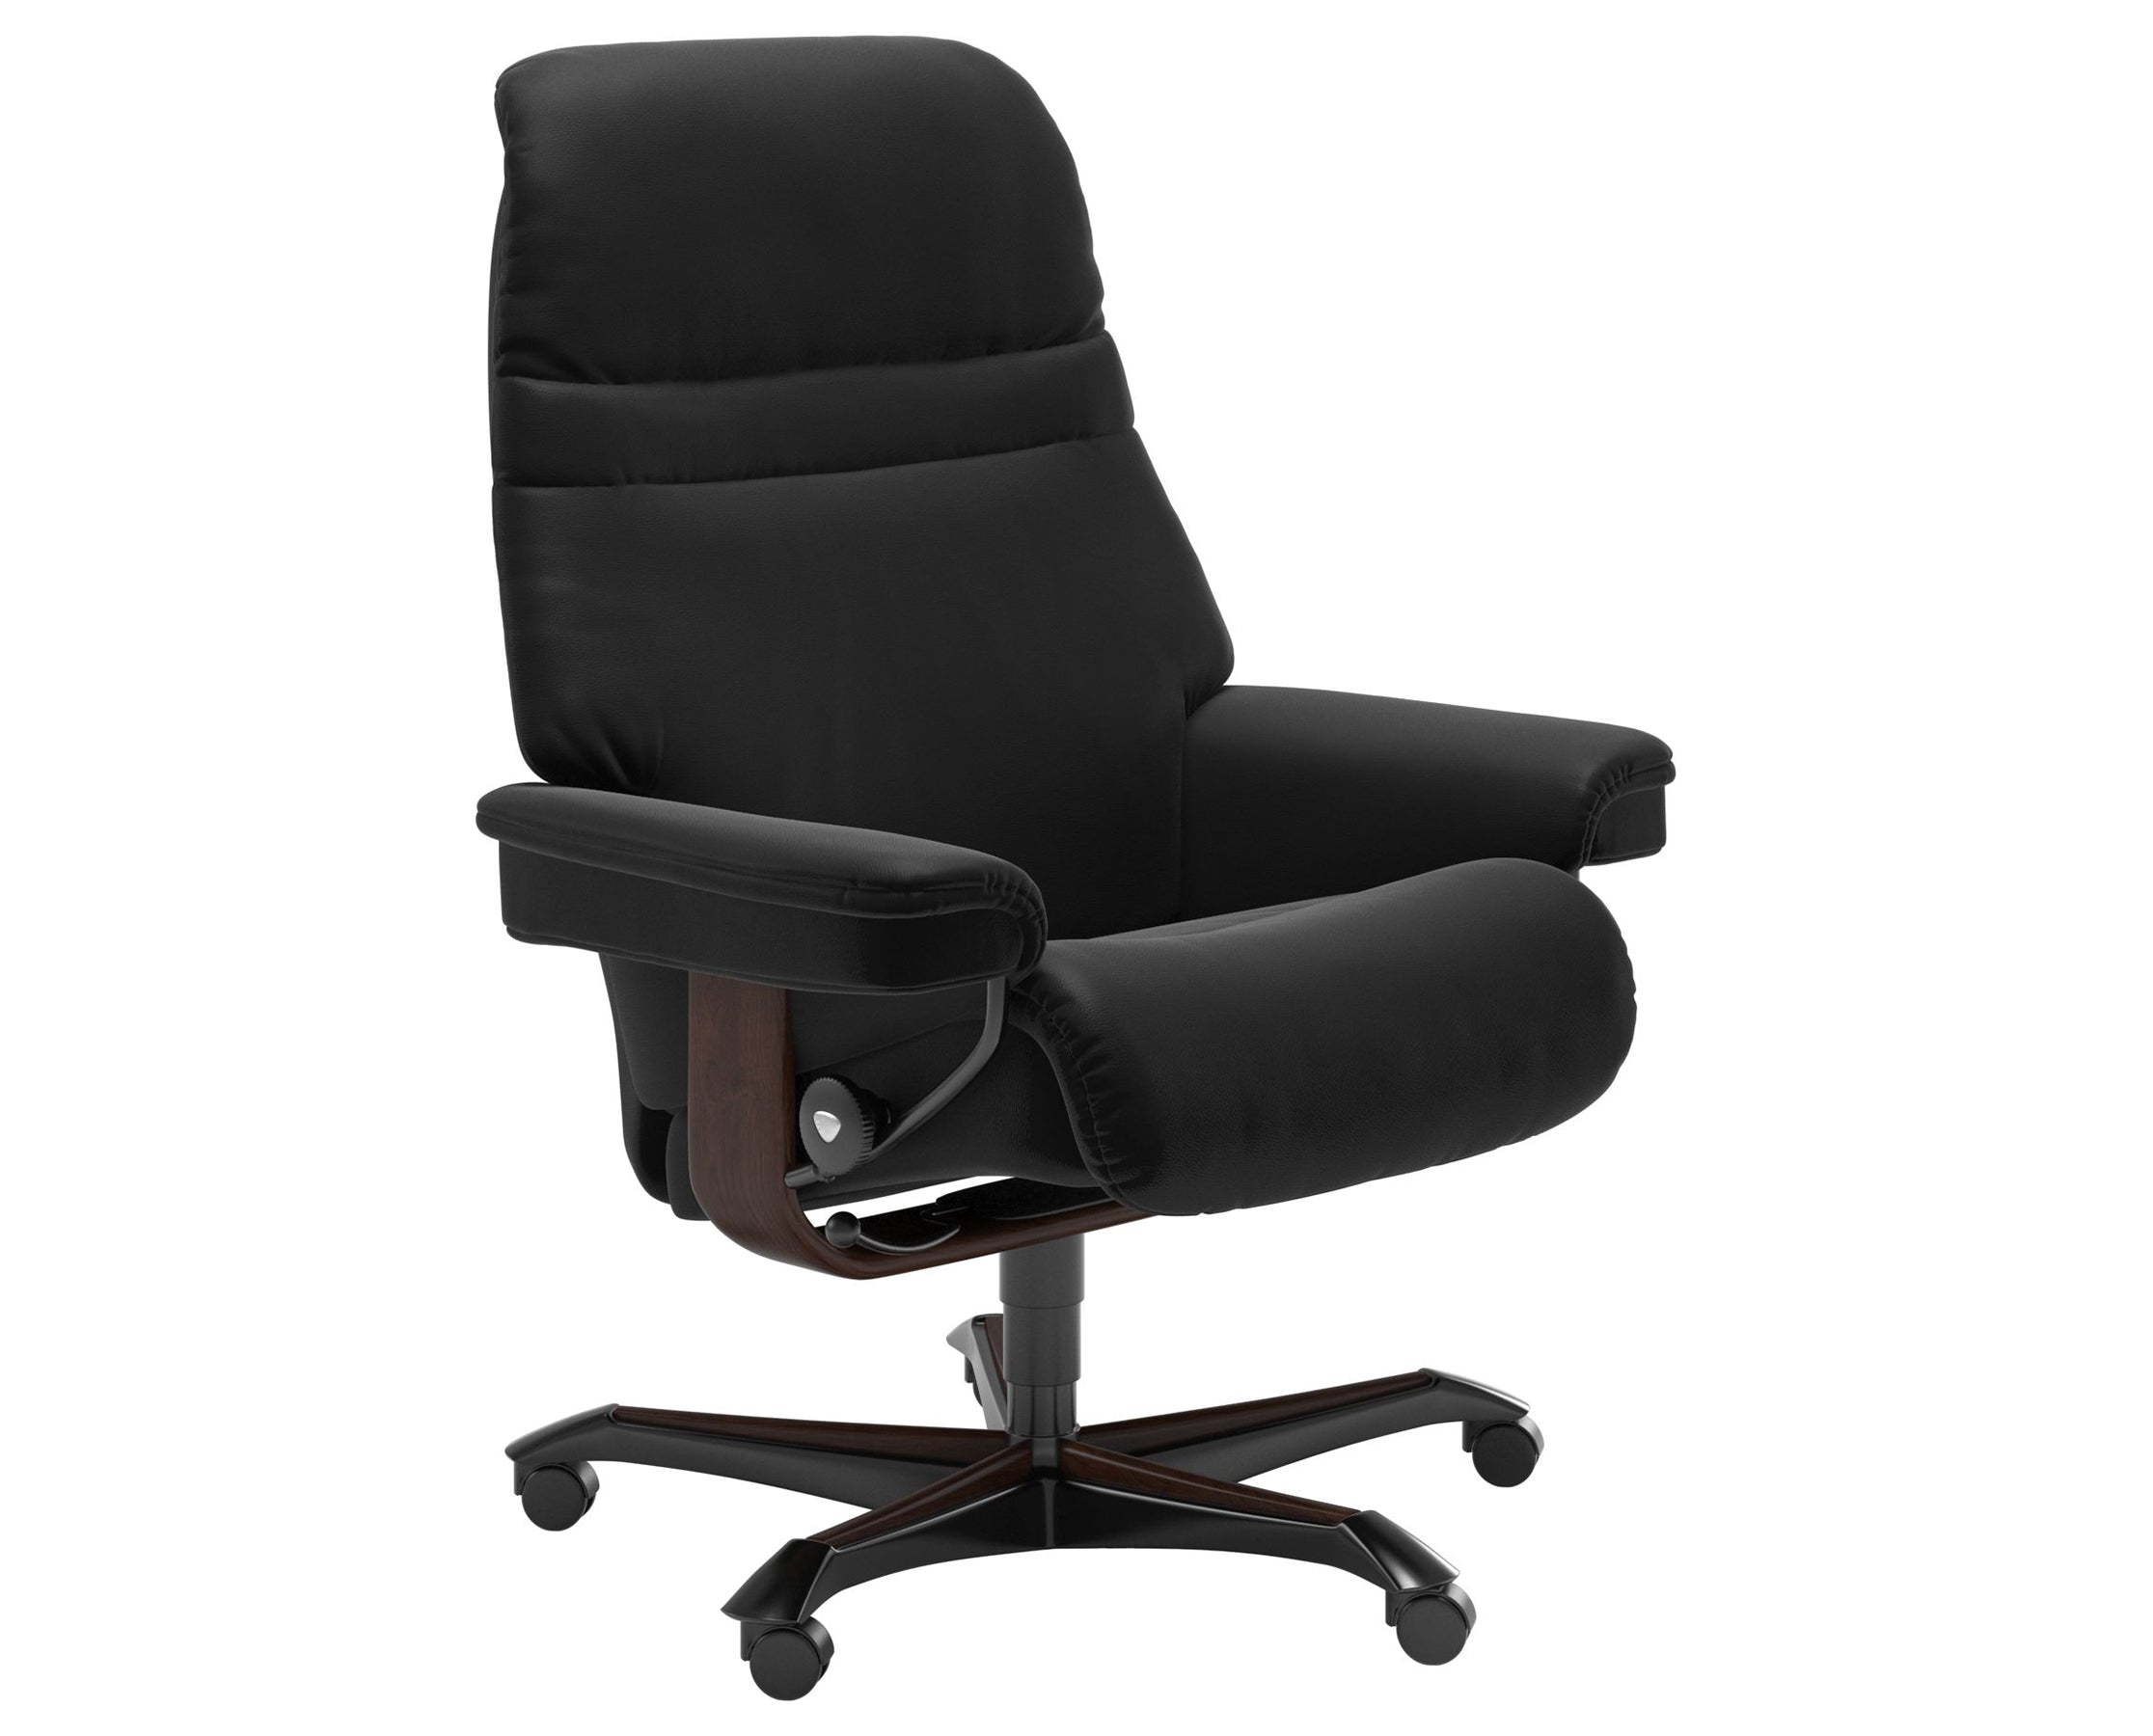 Paloma Leather Black M and Brown Base | Stressless Sunrise Home Office Chair | Valley Ridge Furniture